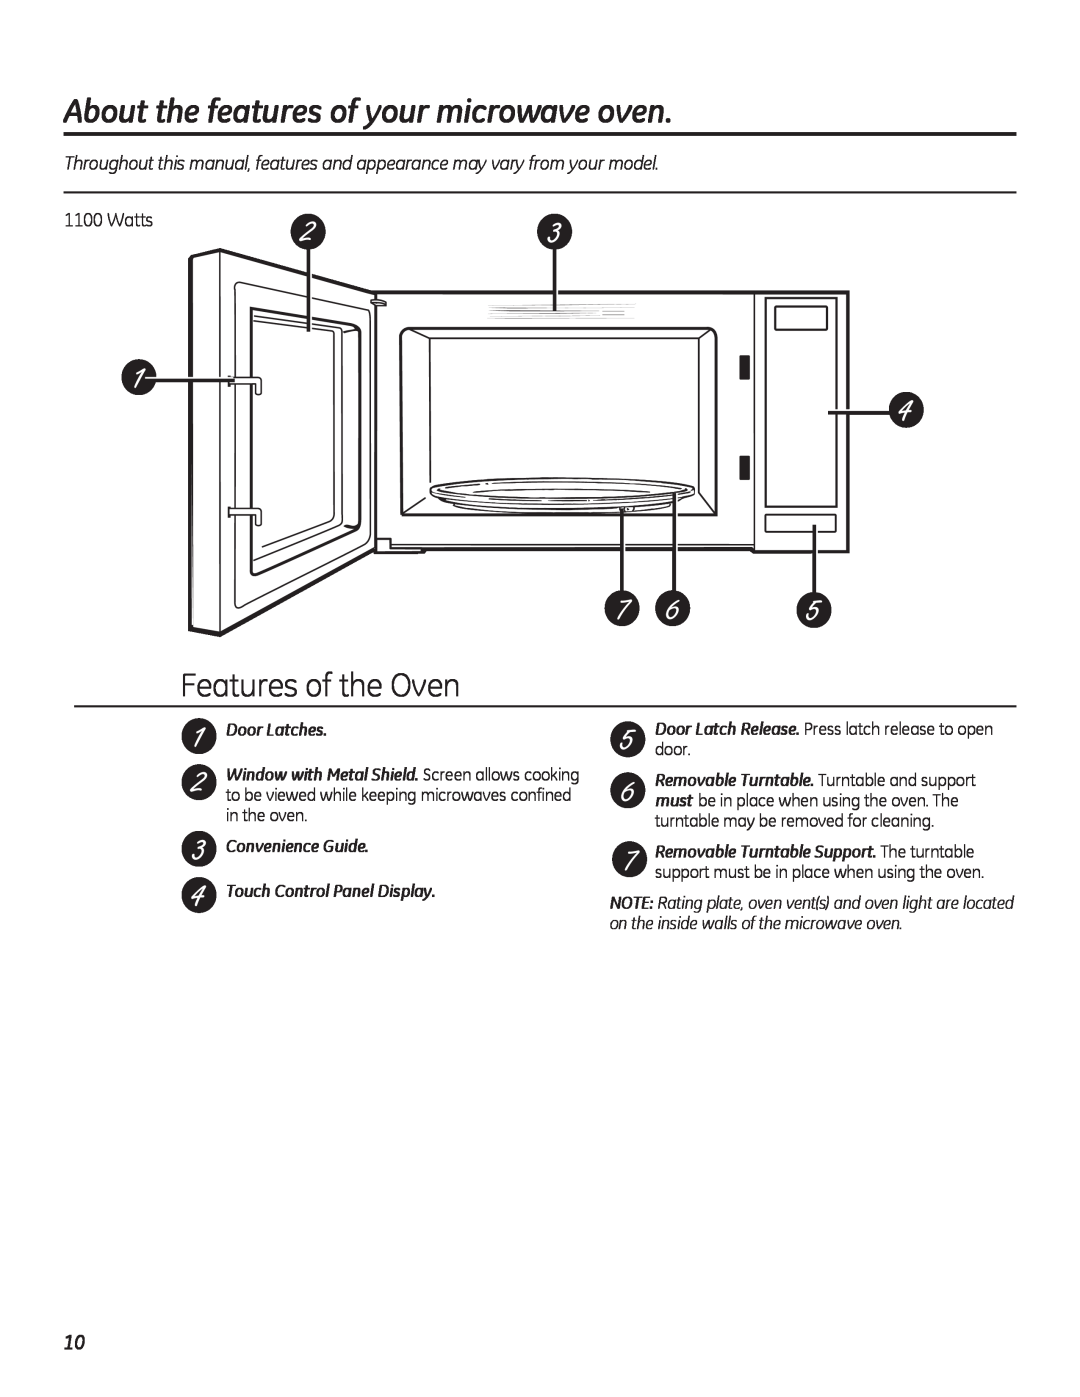 GE PEB7226 owner manual About the features of your microwave oven, Features of the Oven, Door Latches 